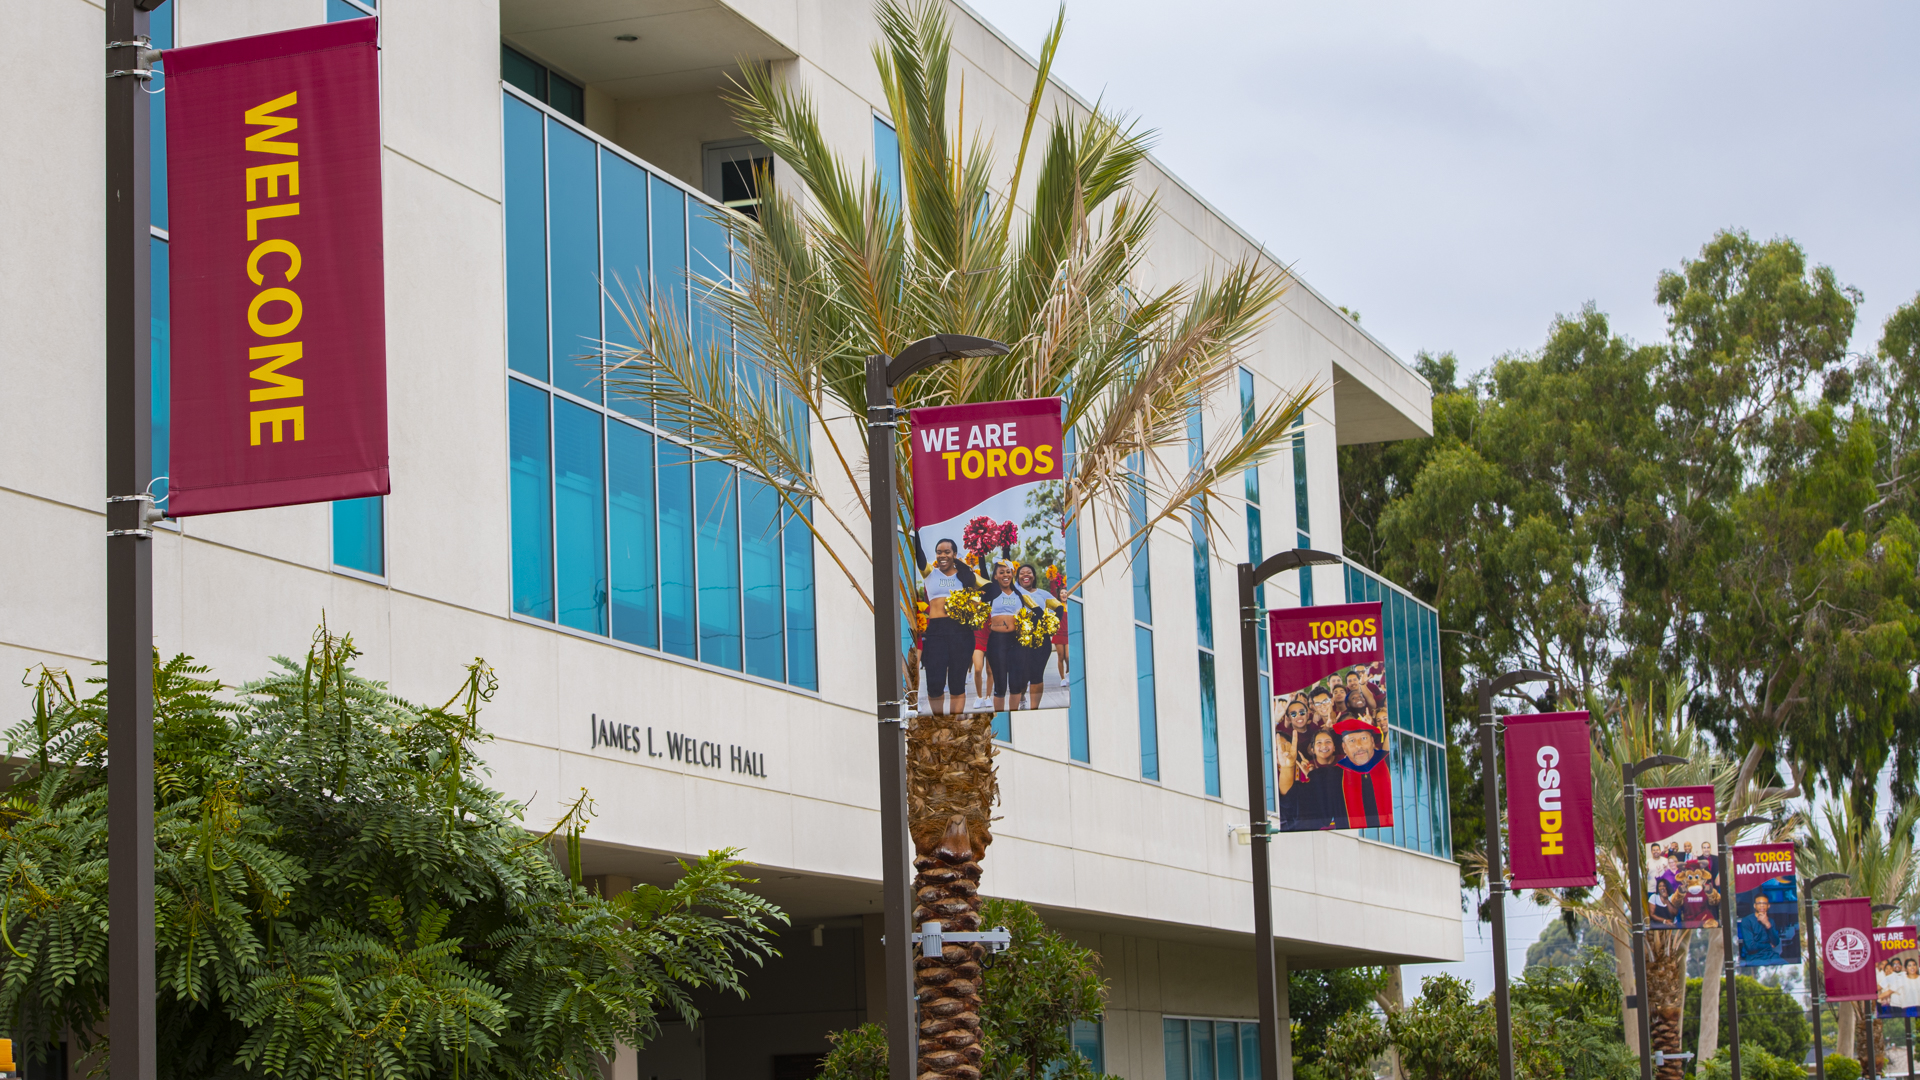 2021 CSUDH Campus Banners showing Toro support